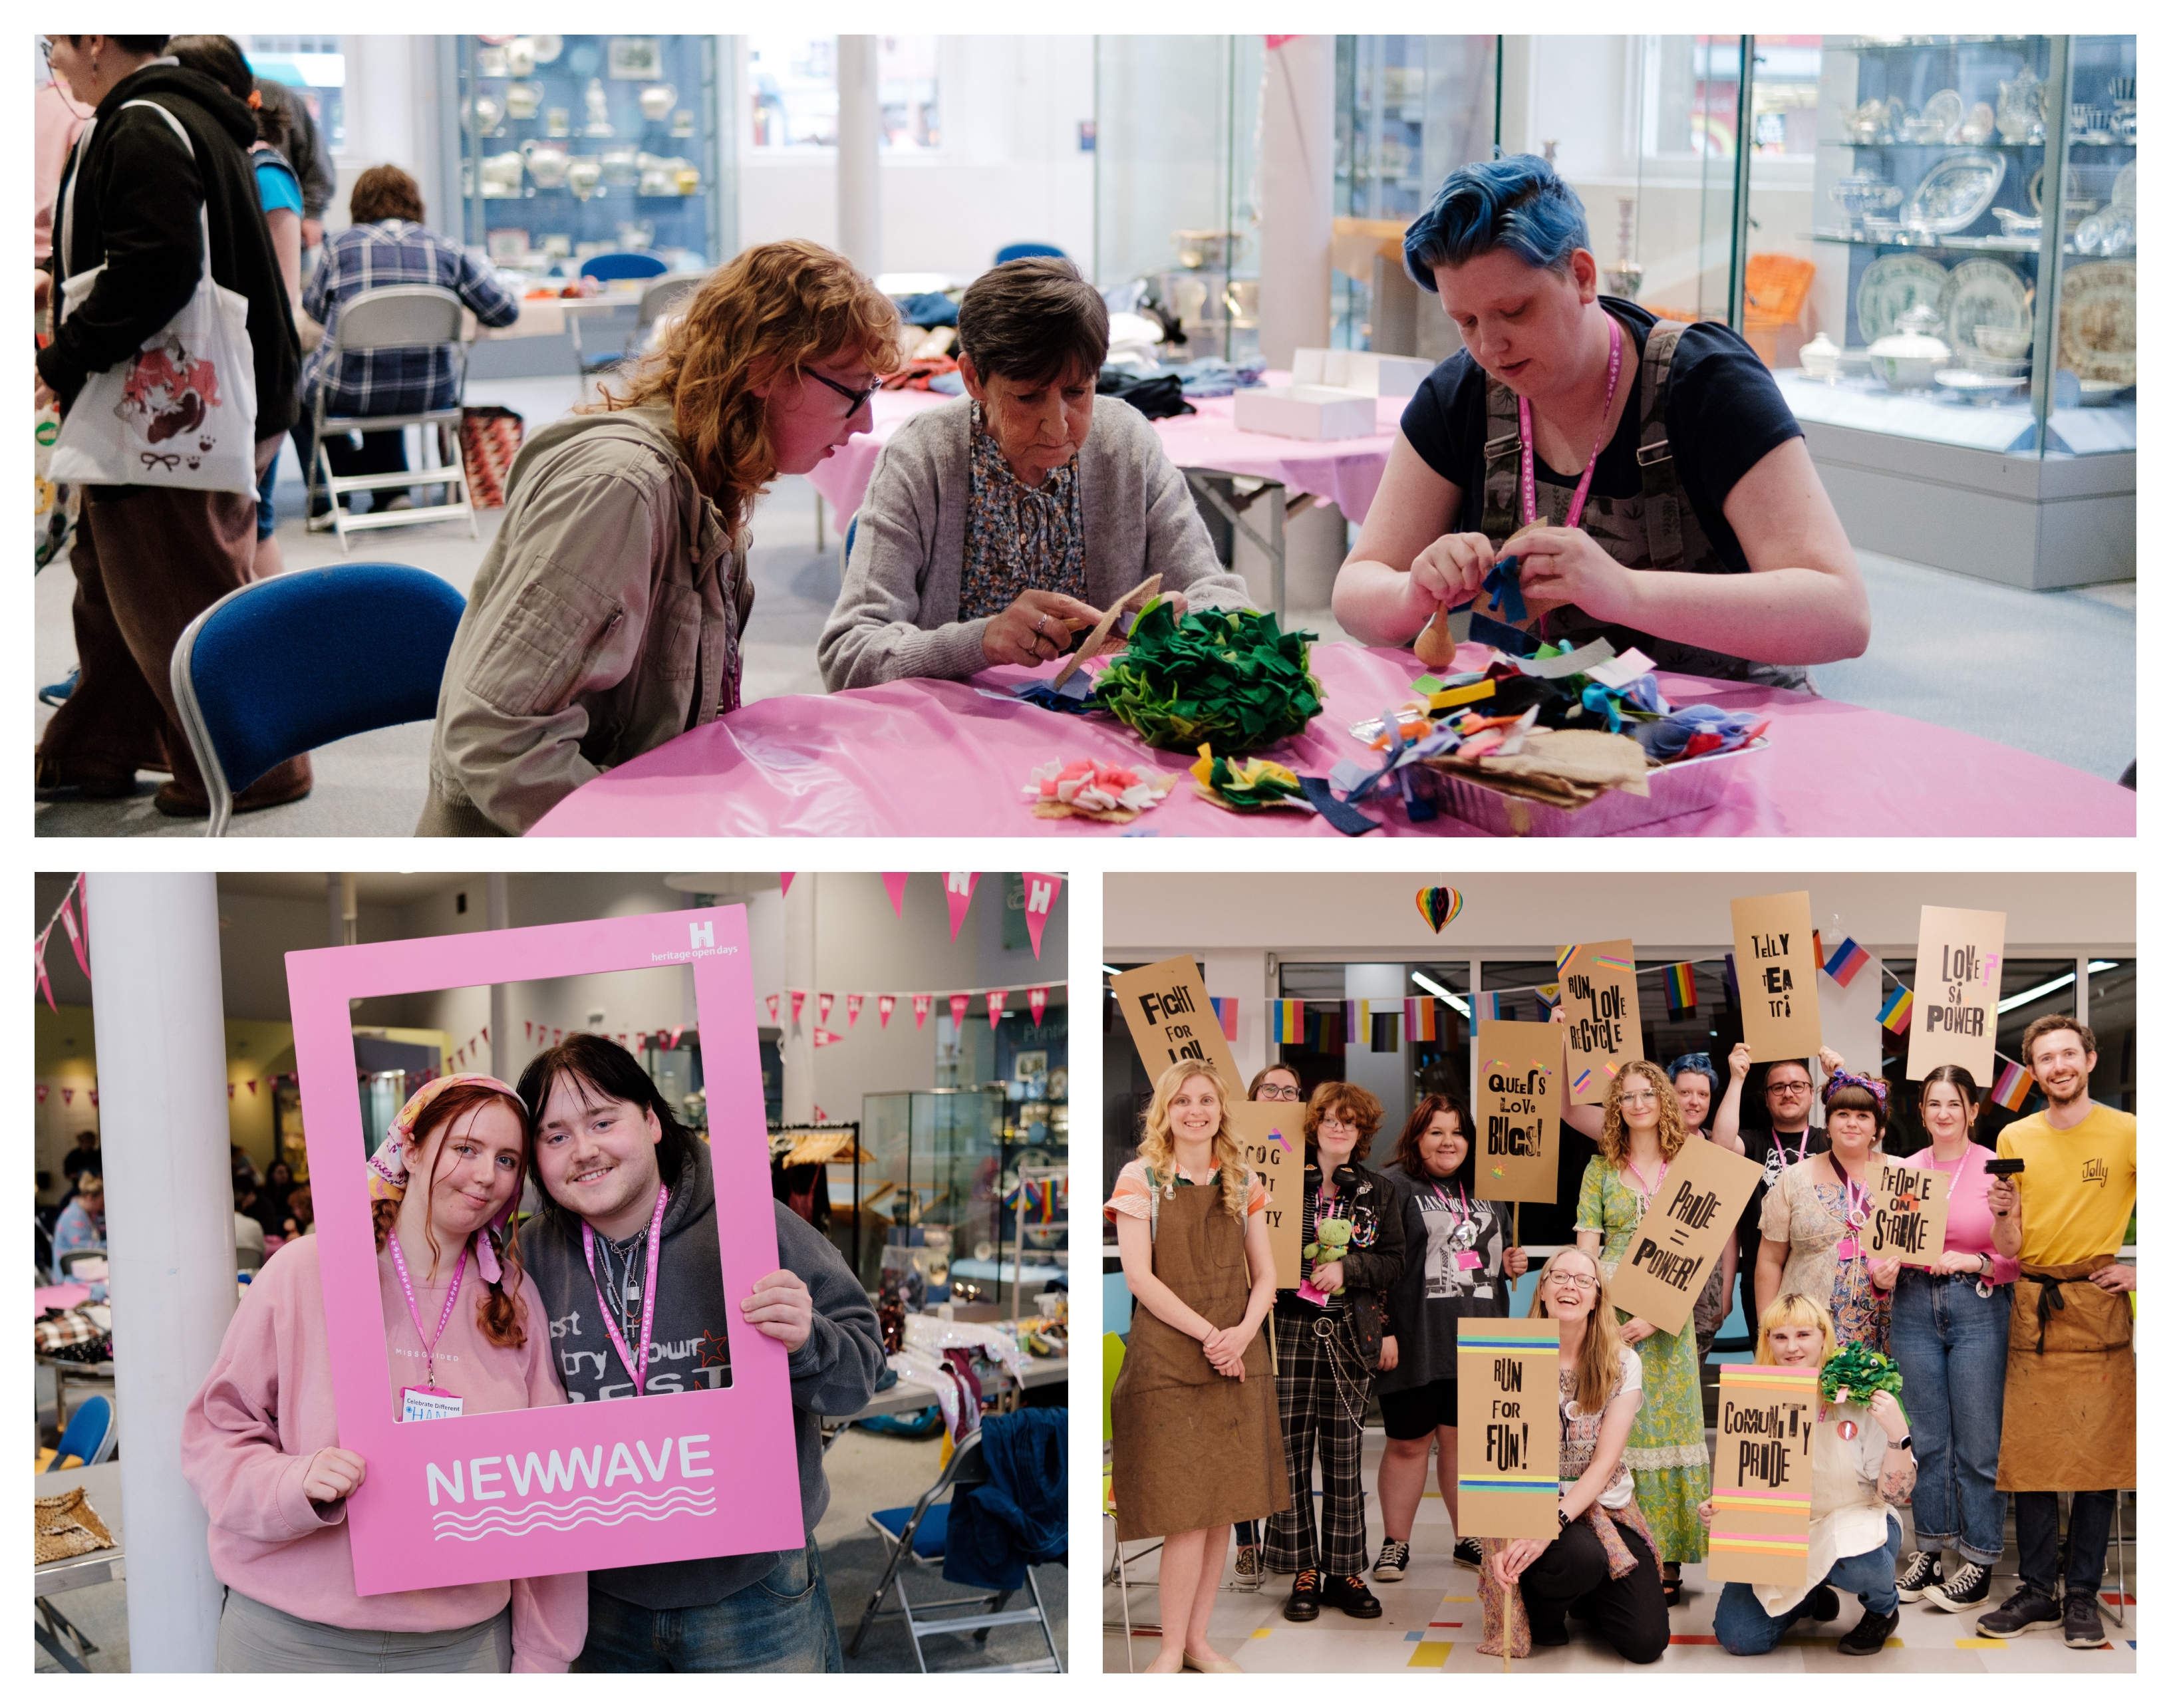 Mosaic of images of young adults crafting at a table, holding up cardboard protest signs, looking through a pink selfie frame.